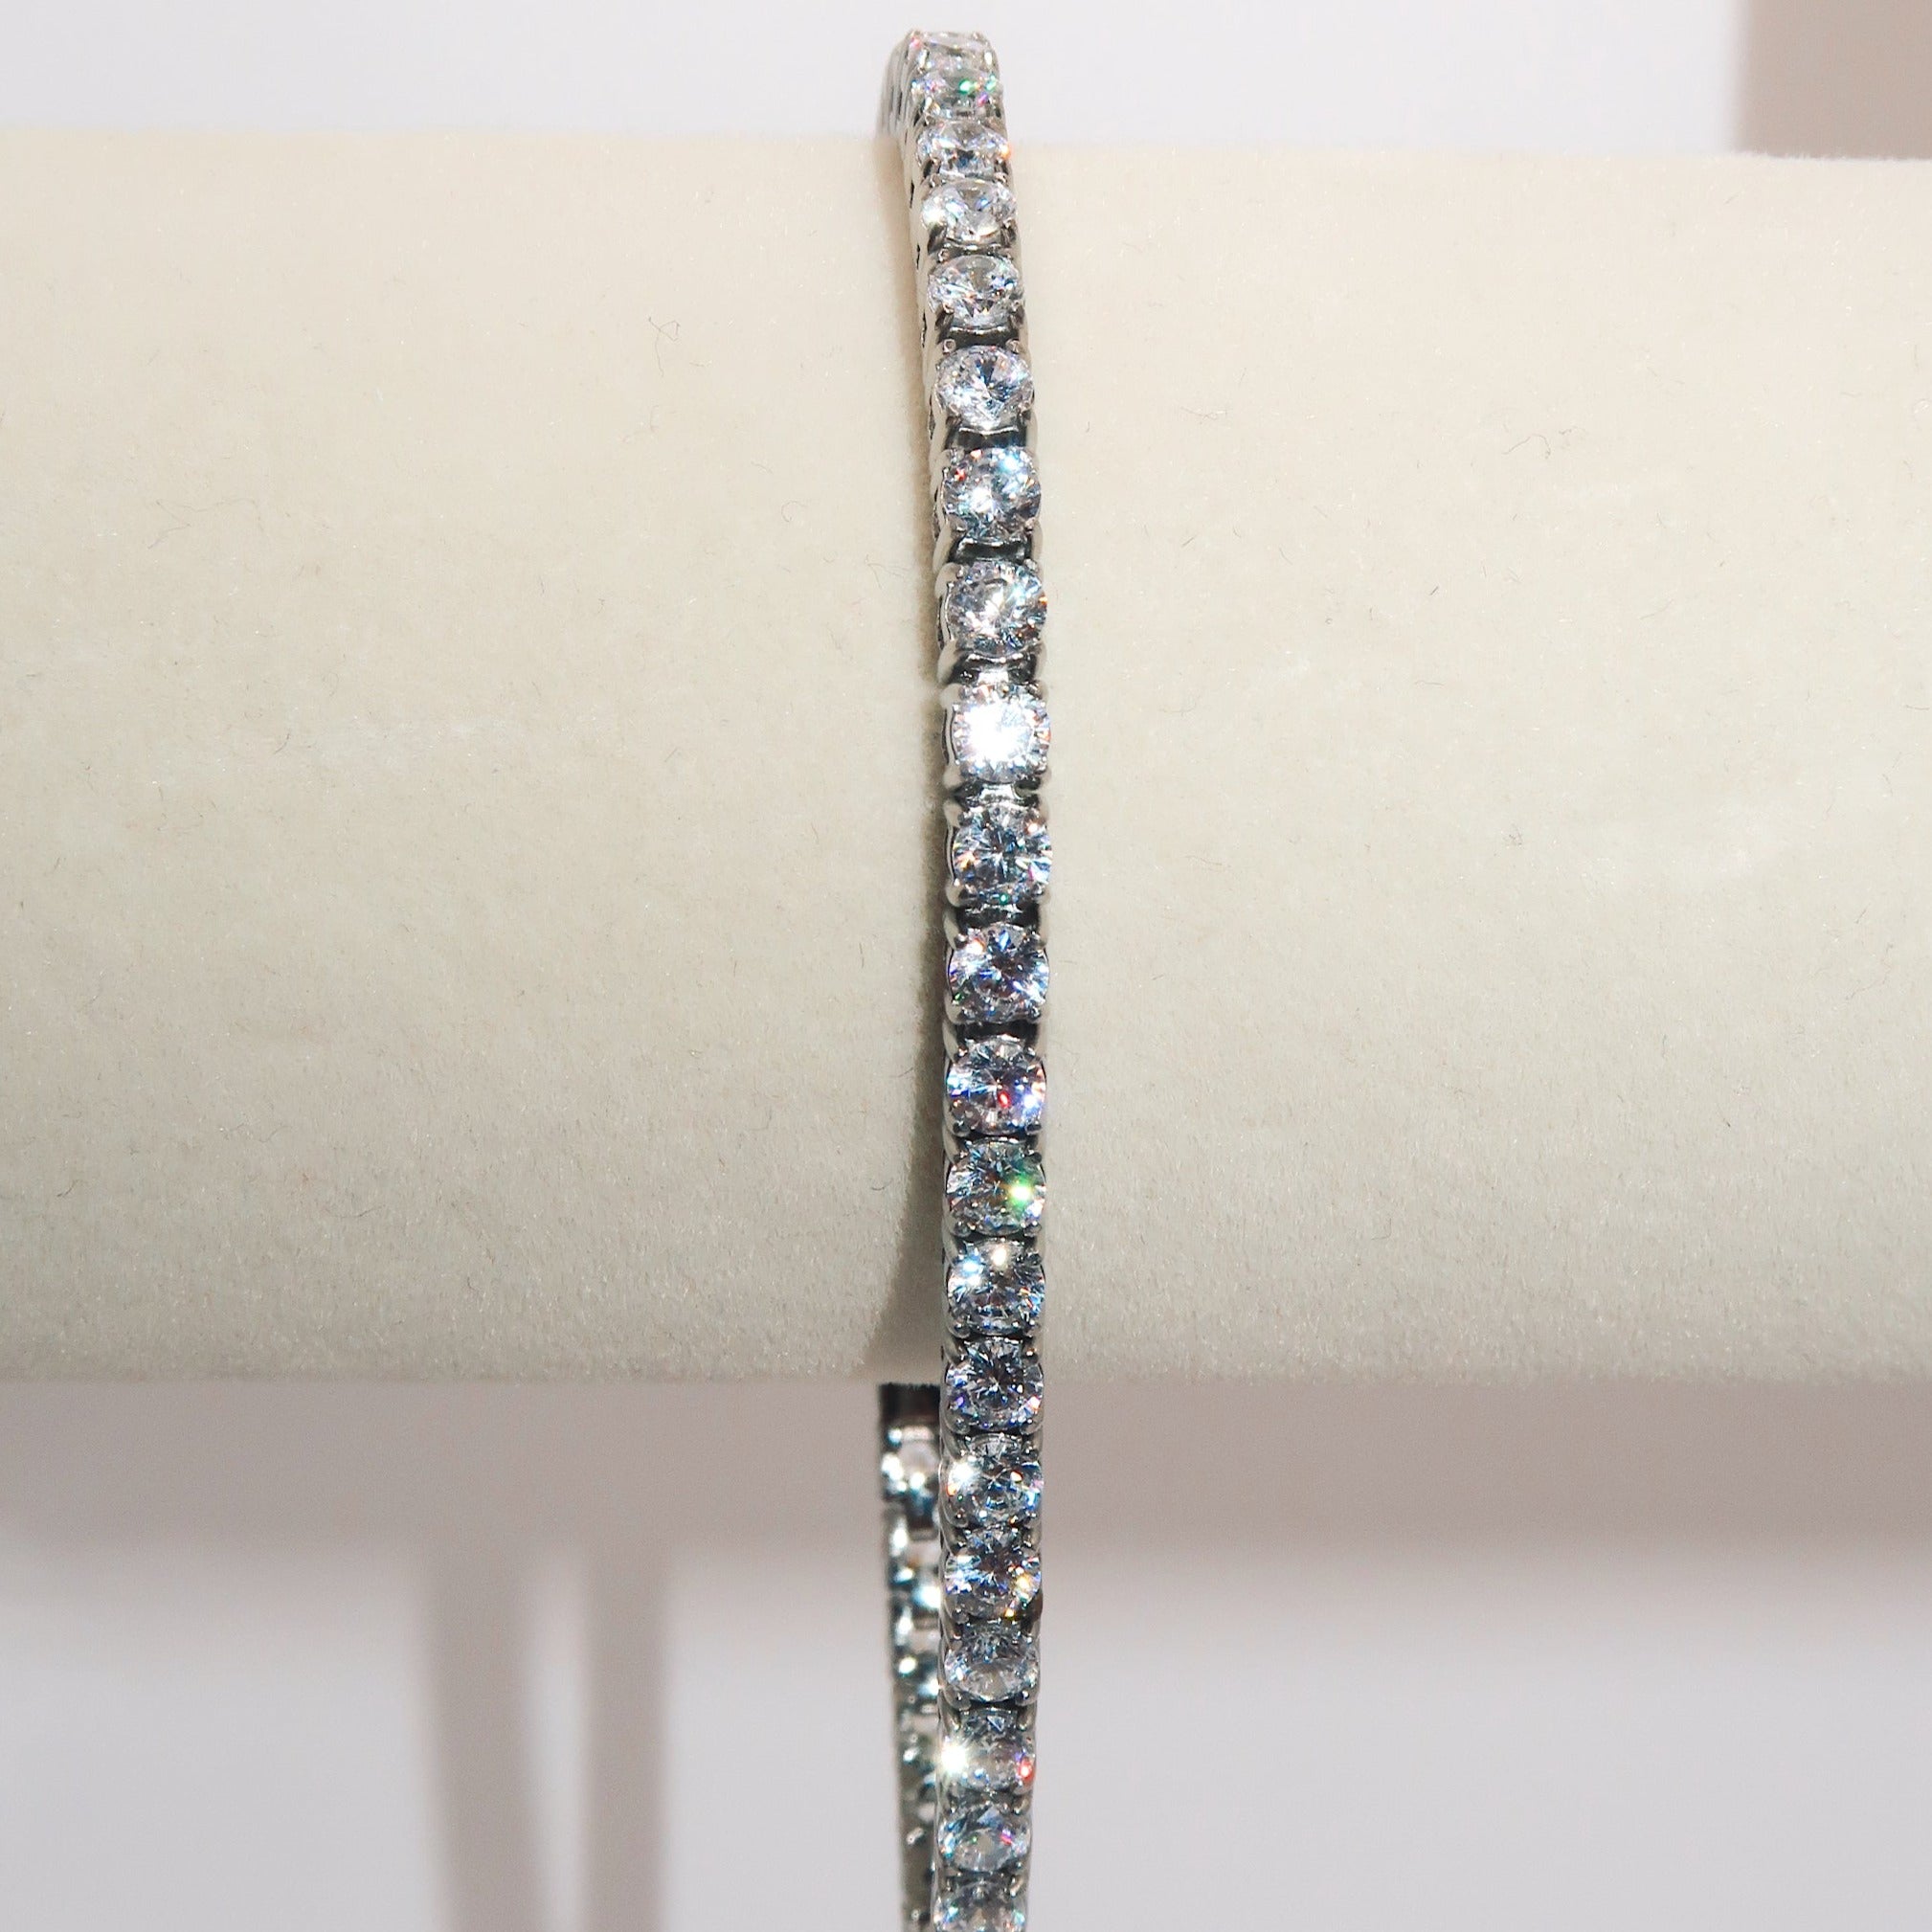 VALENTINA - 18K PVD Silver Plated Tennis Bracelet with CZ Stones - Mixed Metals